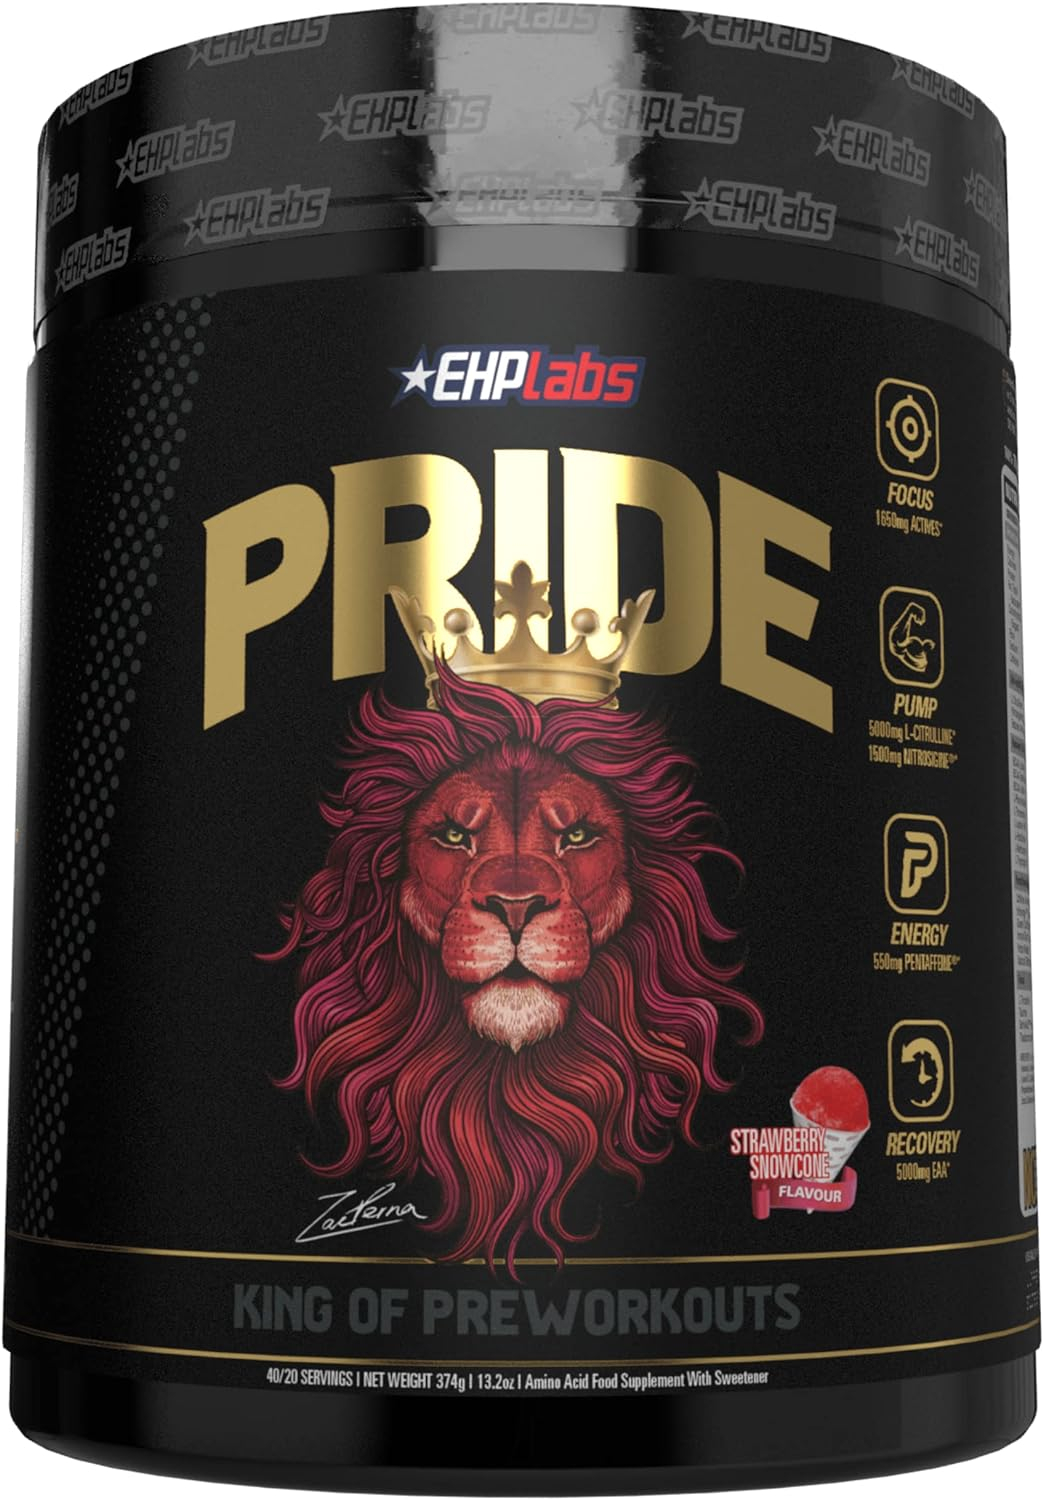 EHPlabs Pride pre workout Powder - Full Strength pre workout Men, Women, Energy Supplements, Sharp Focus, Epic Pumps  Faster Recovery - Jungle Fruits (40 Servings)